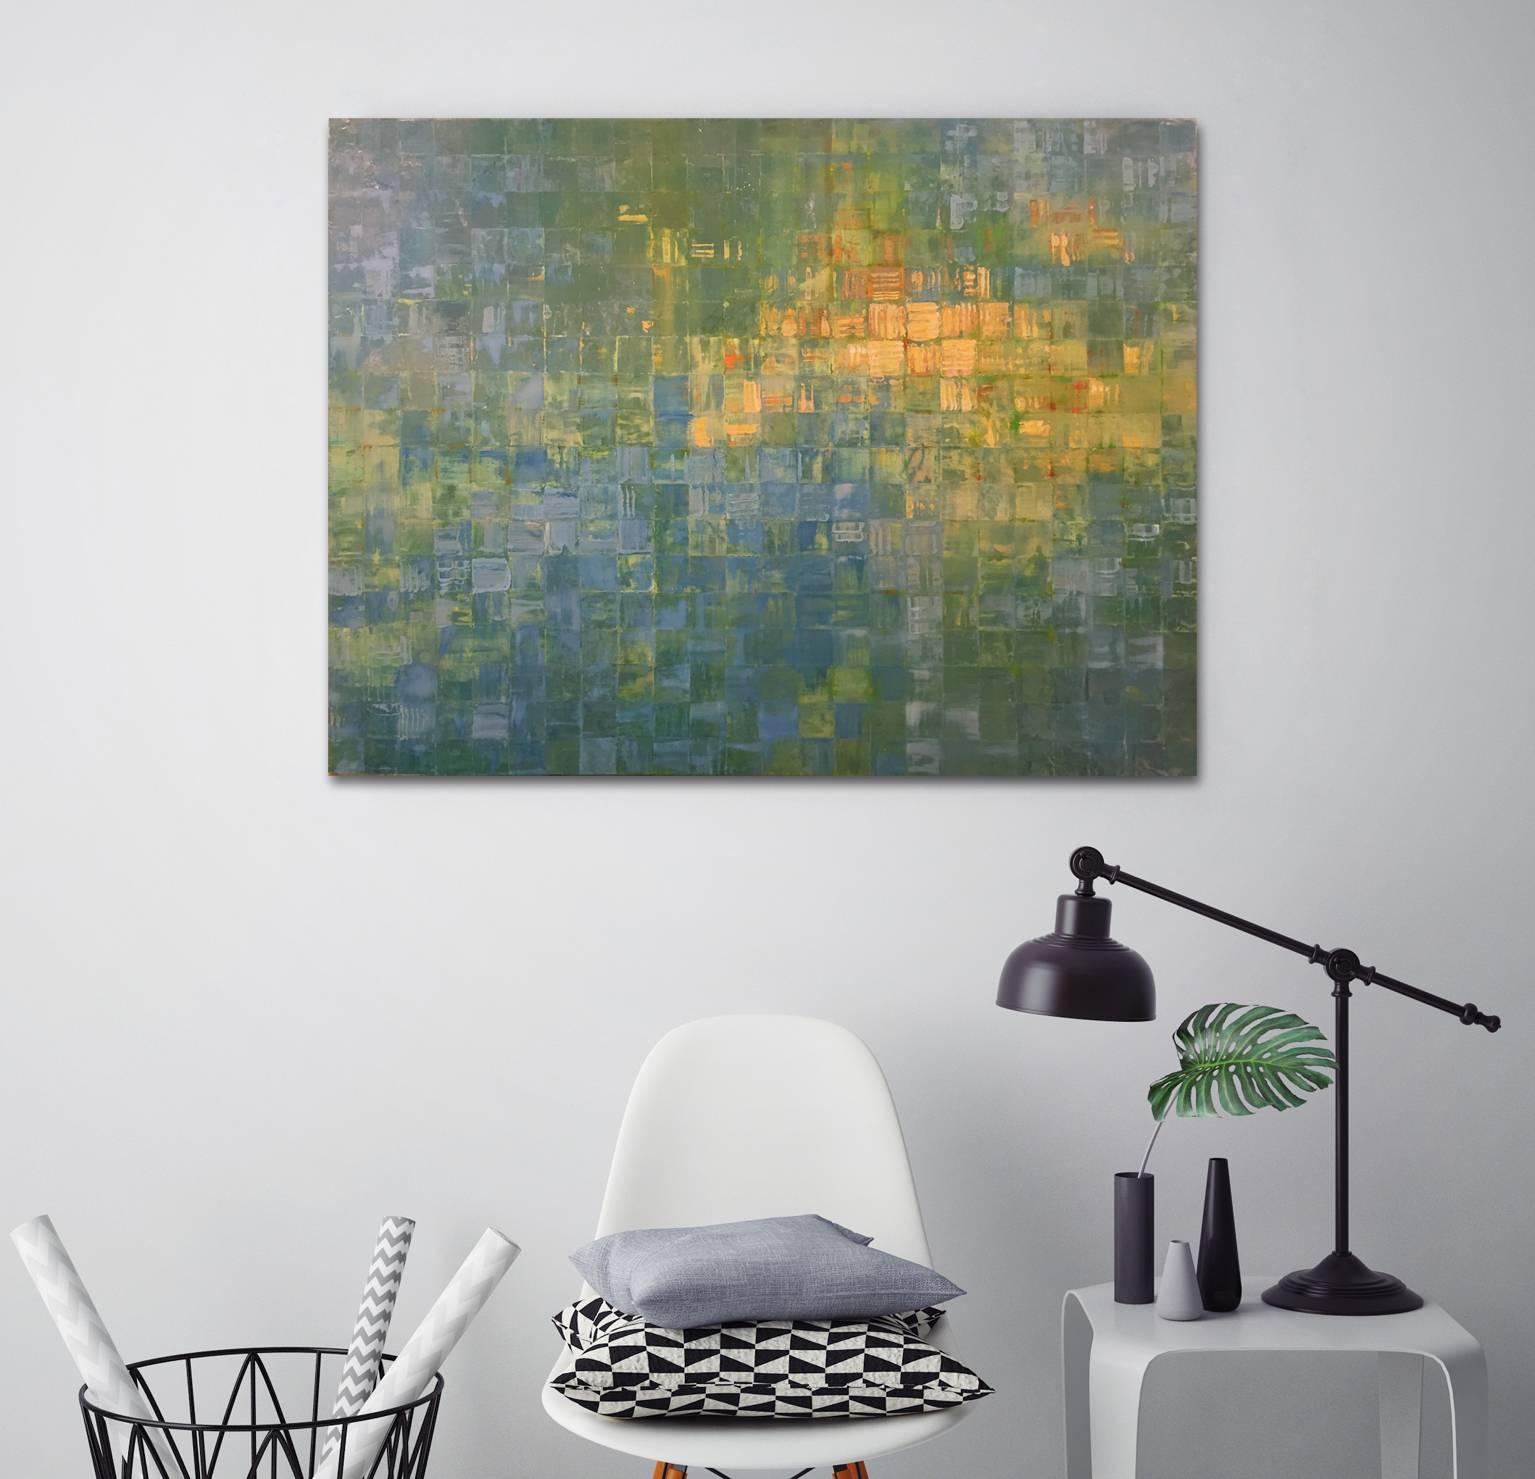 Reclaimed aluminum printing plate, green, yellow, blue, peach, orange, statement, calm, water, grid, geometric, modern. Artistic influence: Gustav Klimt.

As a Mid-town Manhattan Artist, Ned Martin paints what he sees everyday in hectic city life